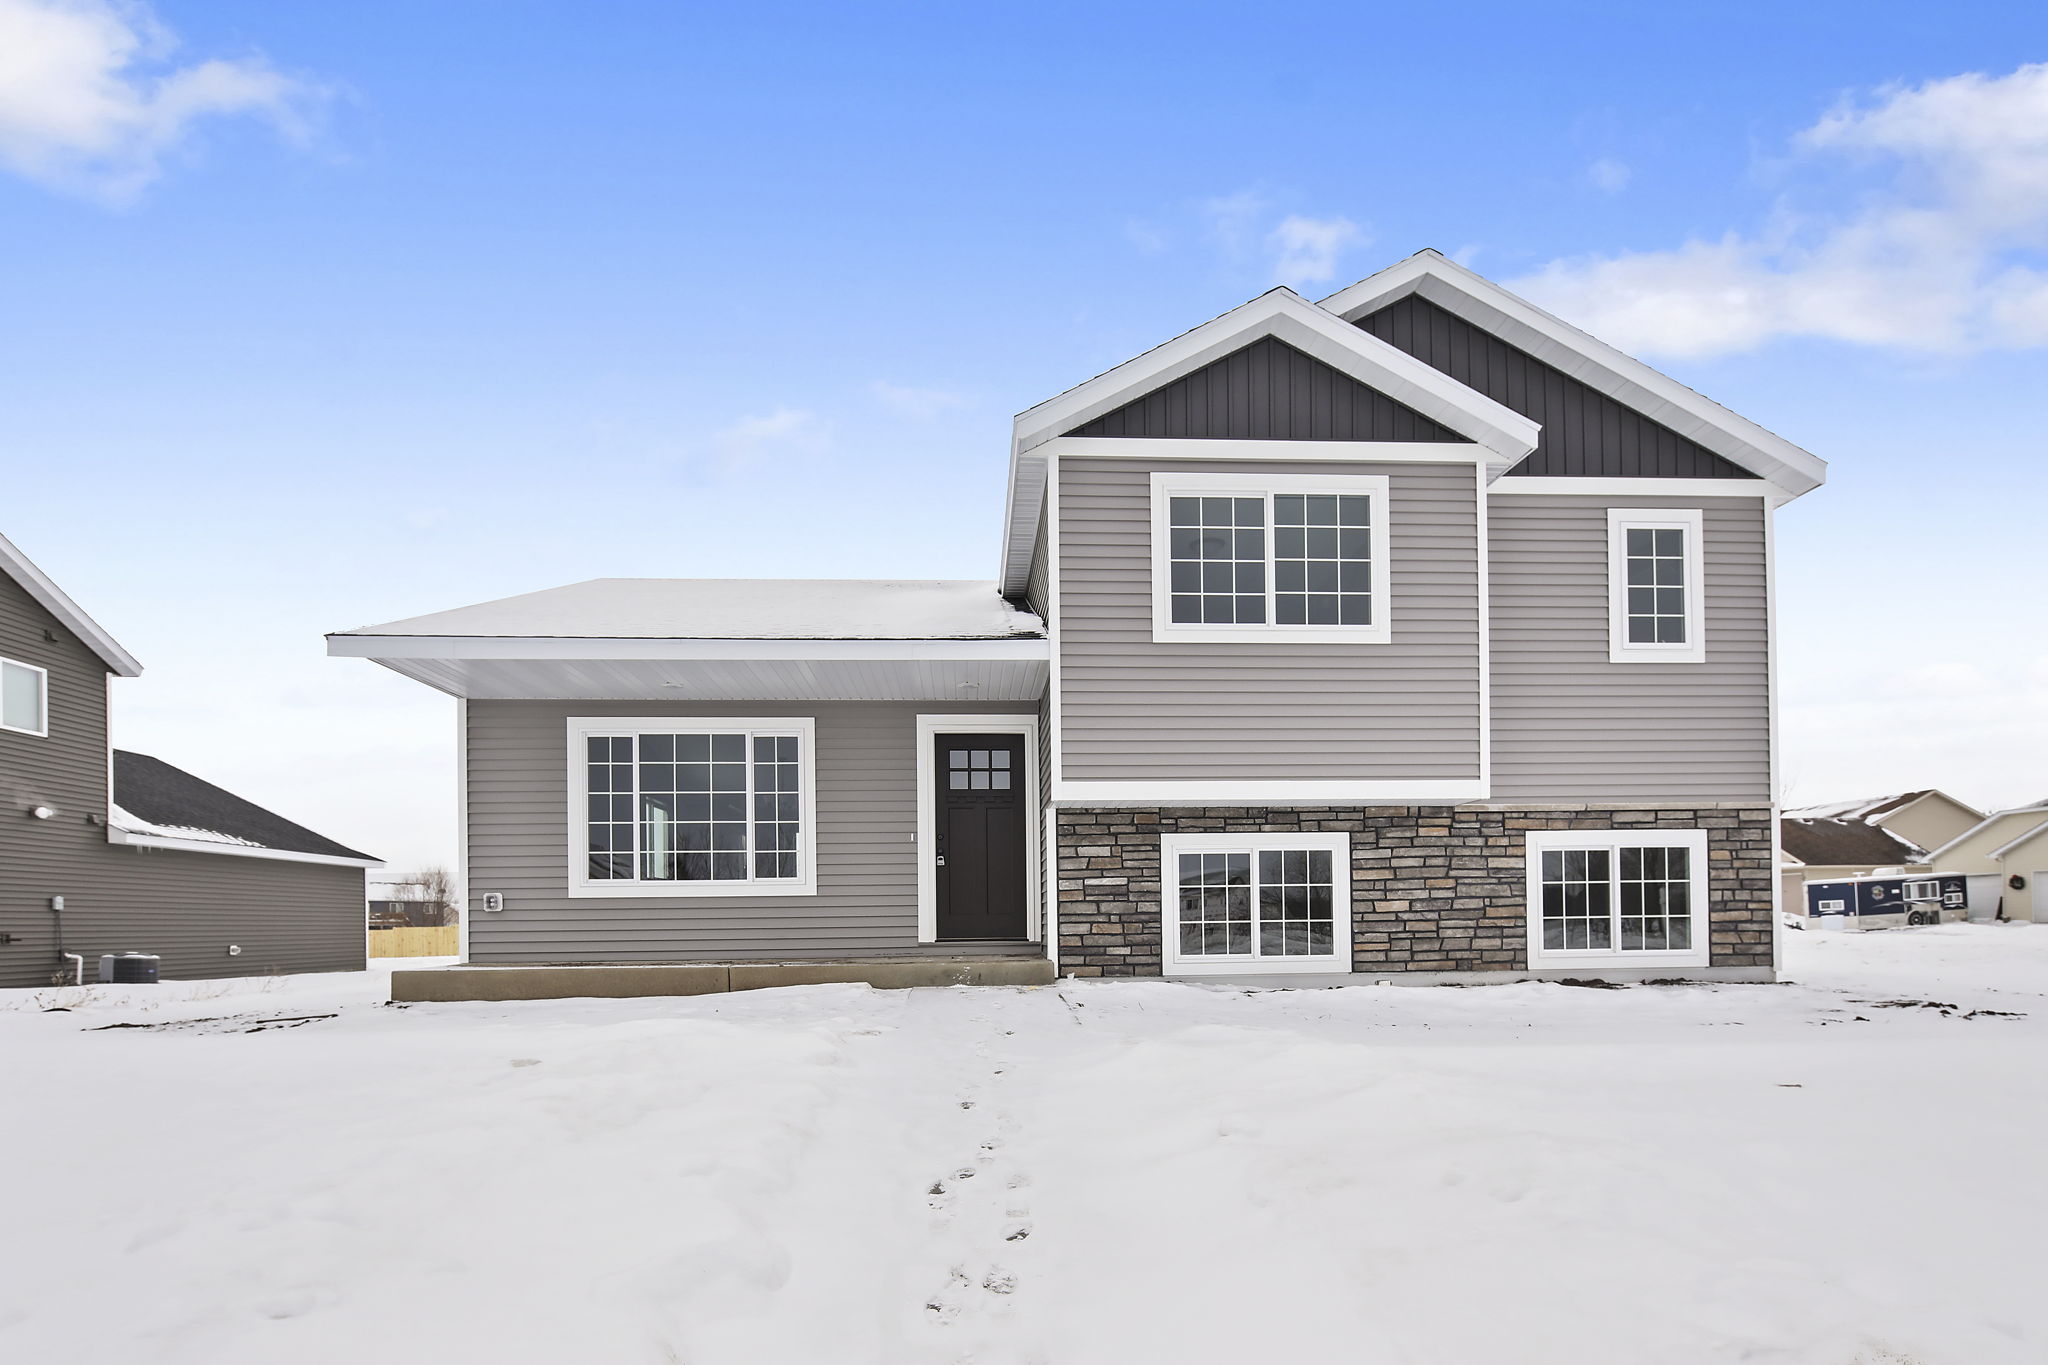  1428 15th St S, Sartell, MN 56377, US